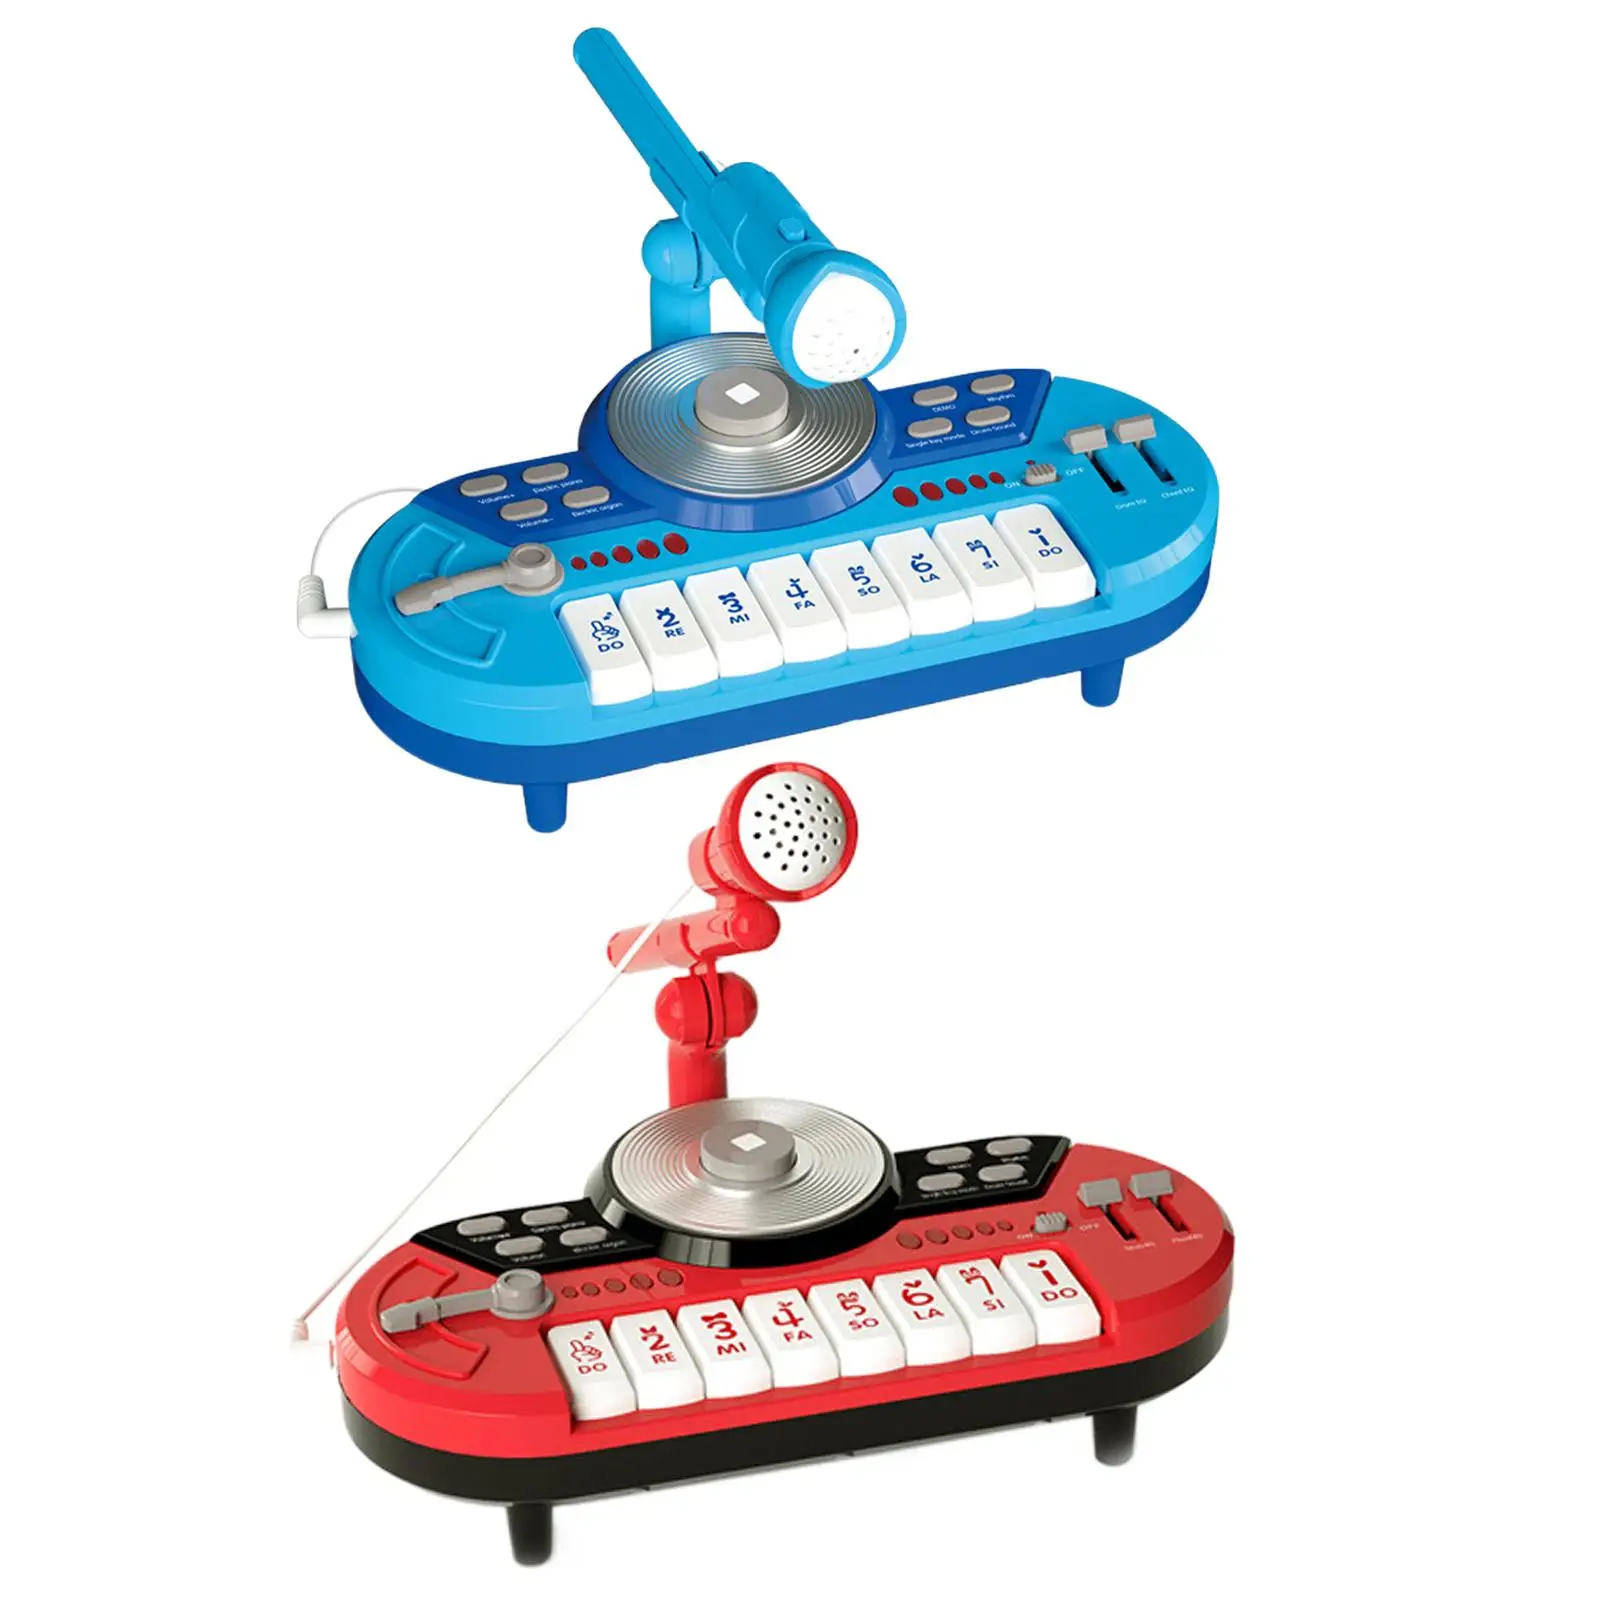 Musical Piano Toy Musical Educational 8 Key DJ Party Mixer Toy for Kids Children